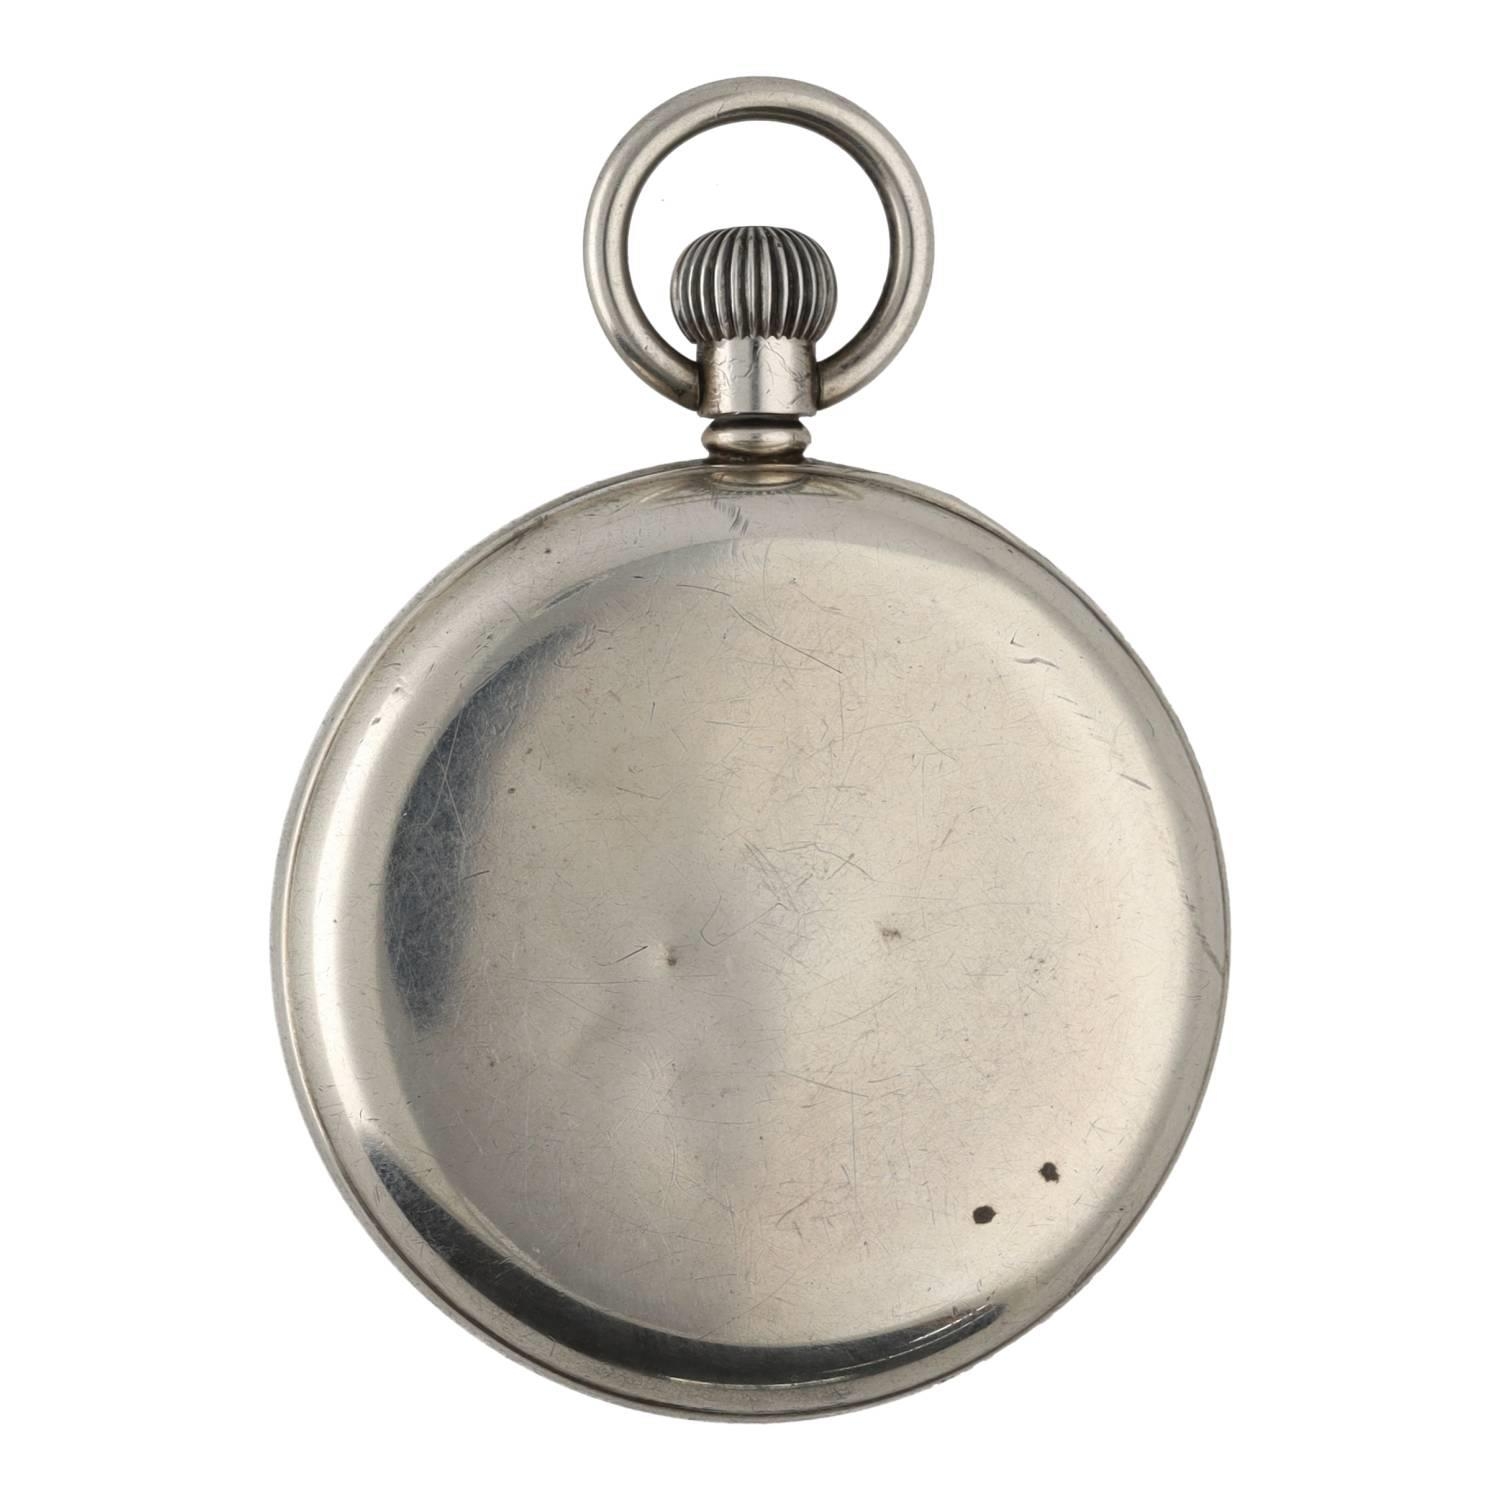 American Waltham 'Traveler' silver lever pocket watch, circa 1902, serial no. 11399972, signed - Image 3 of 3